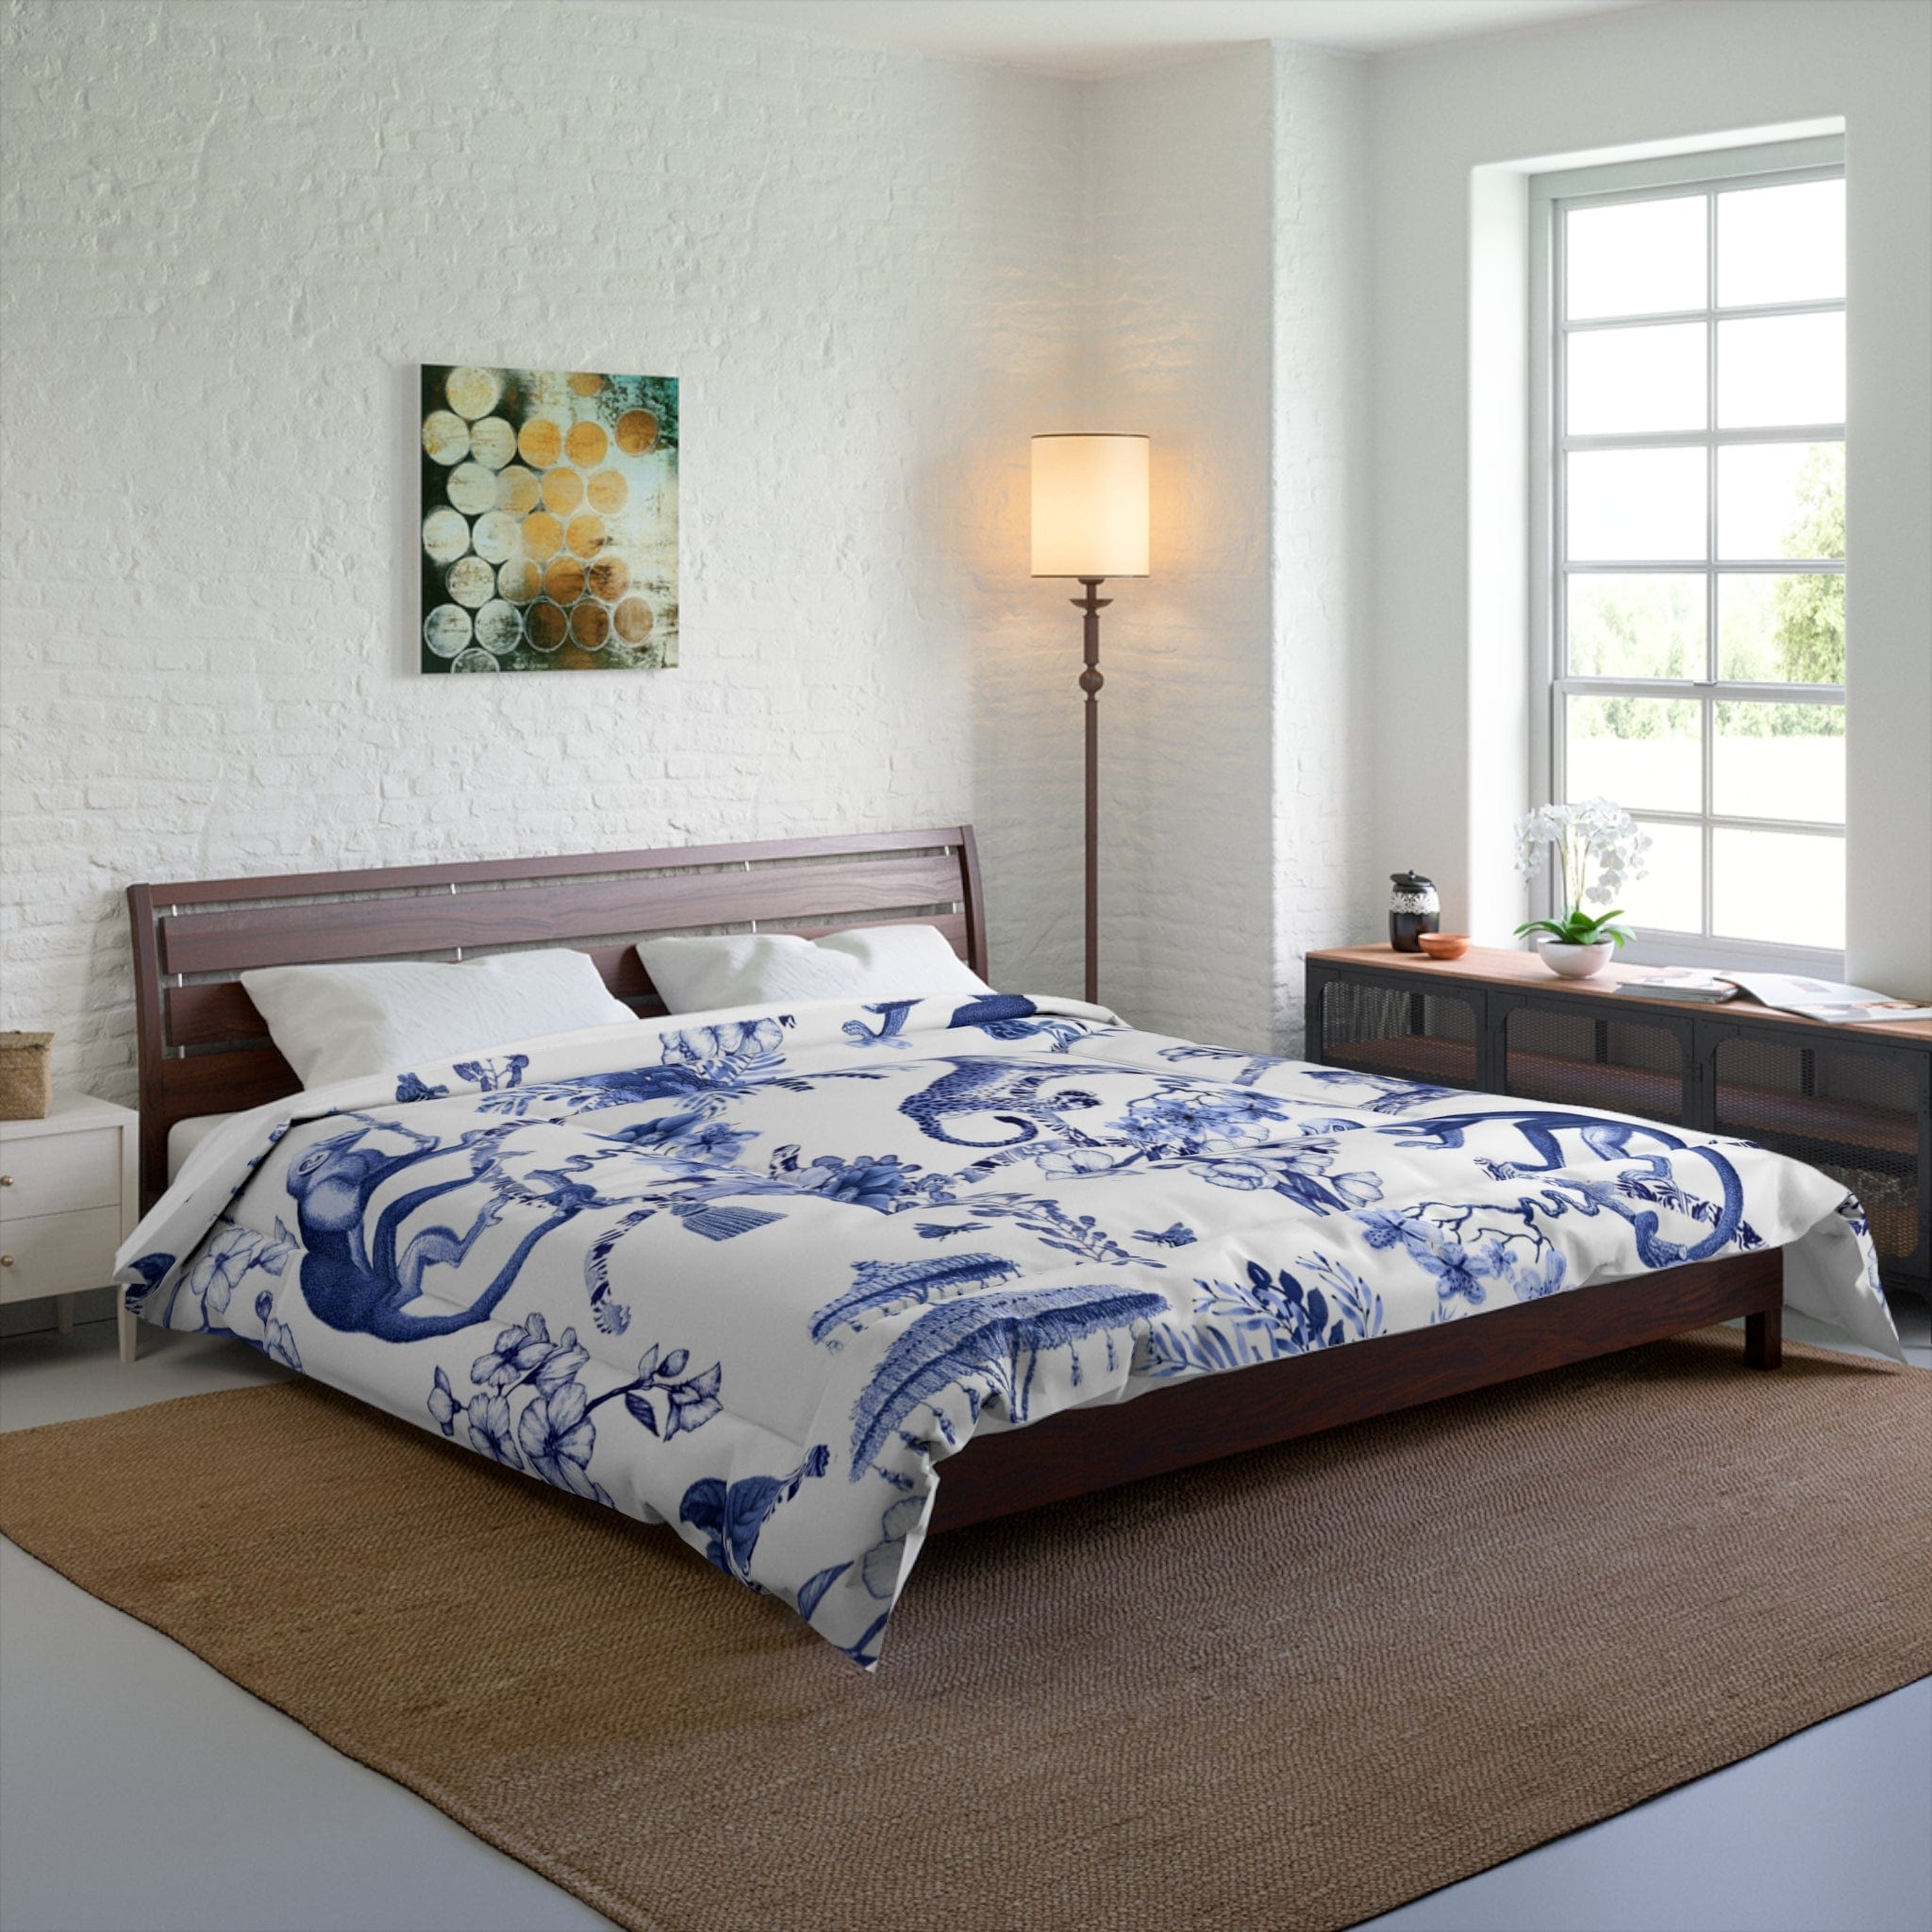 Kate McEnroe New York Floral Blue and White Chinoiserie Jungle Botanical Toile Comforter Comforters 104&quot; × 88&quot; 63686762632495954273